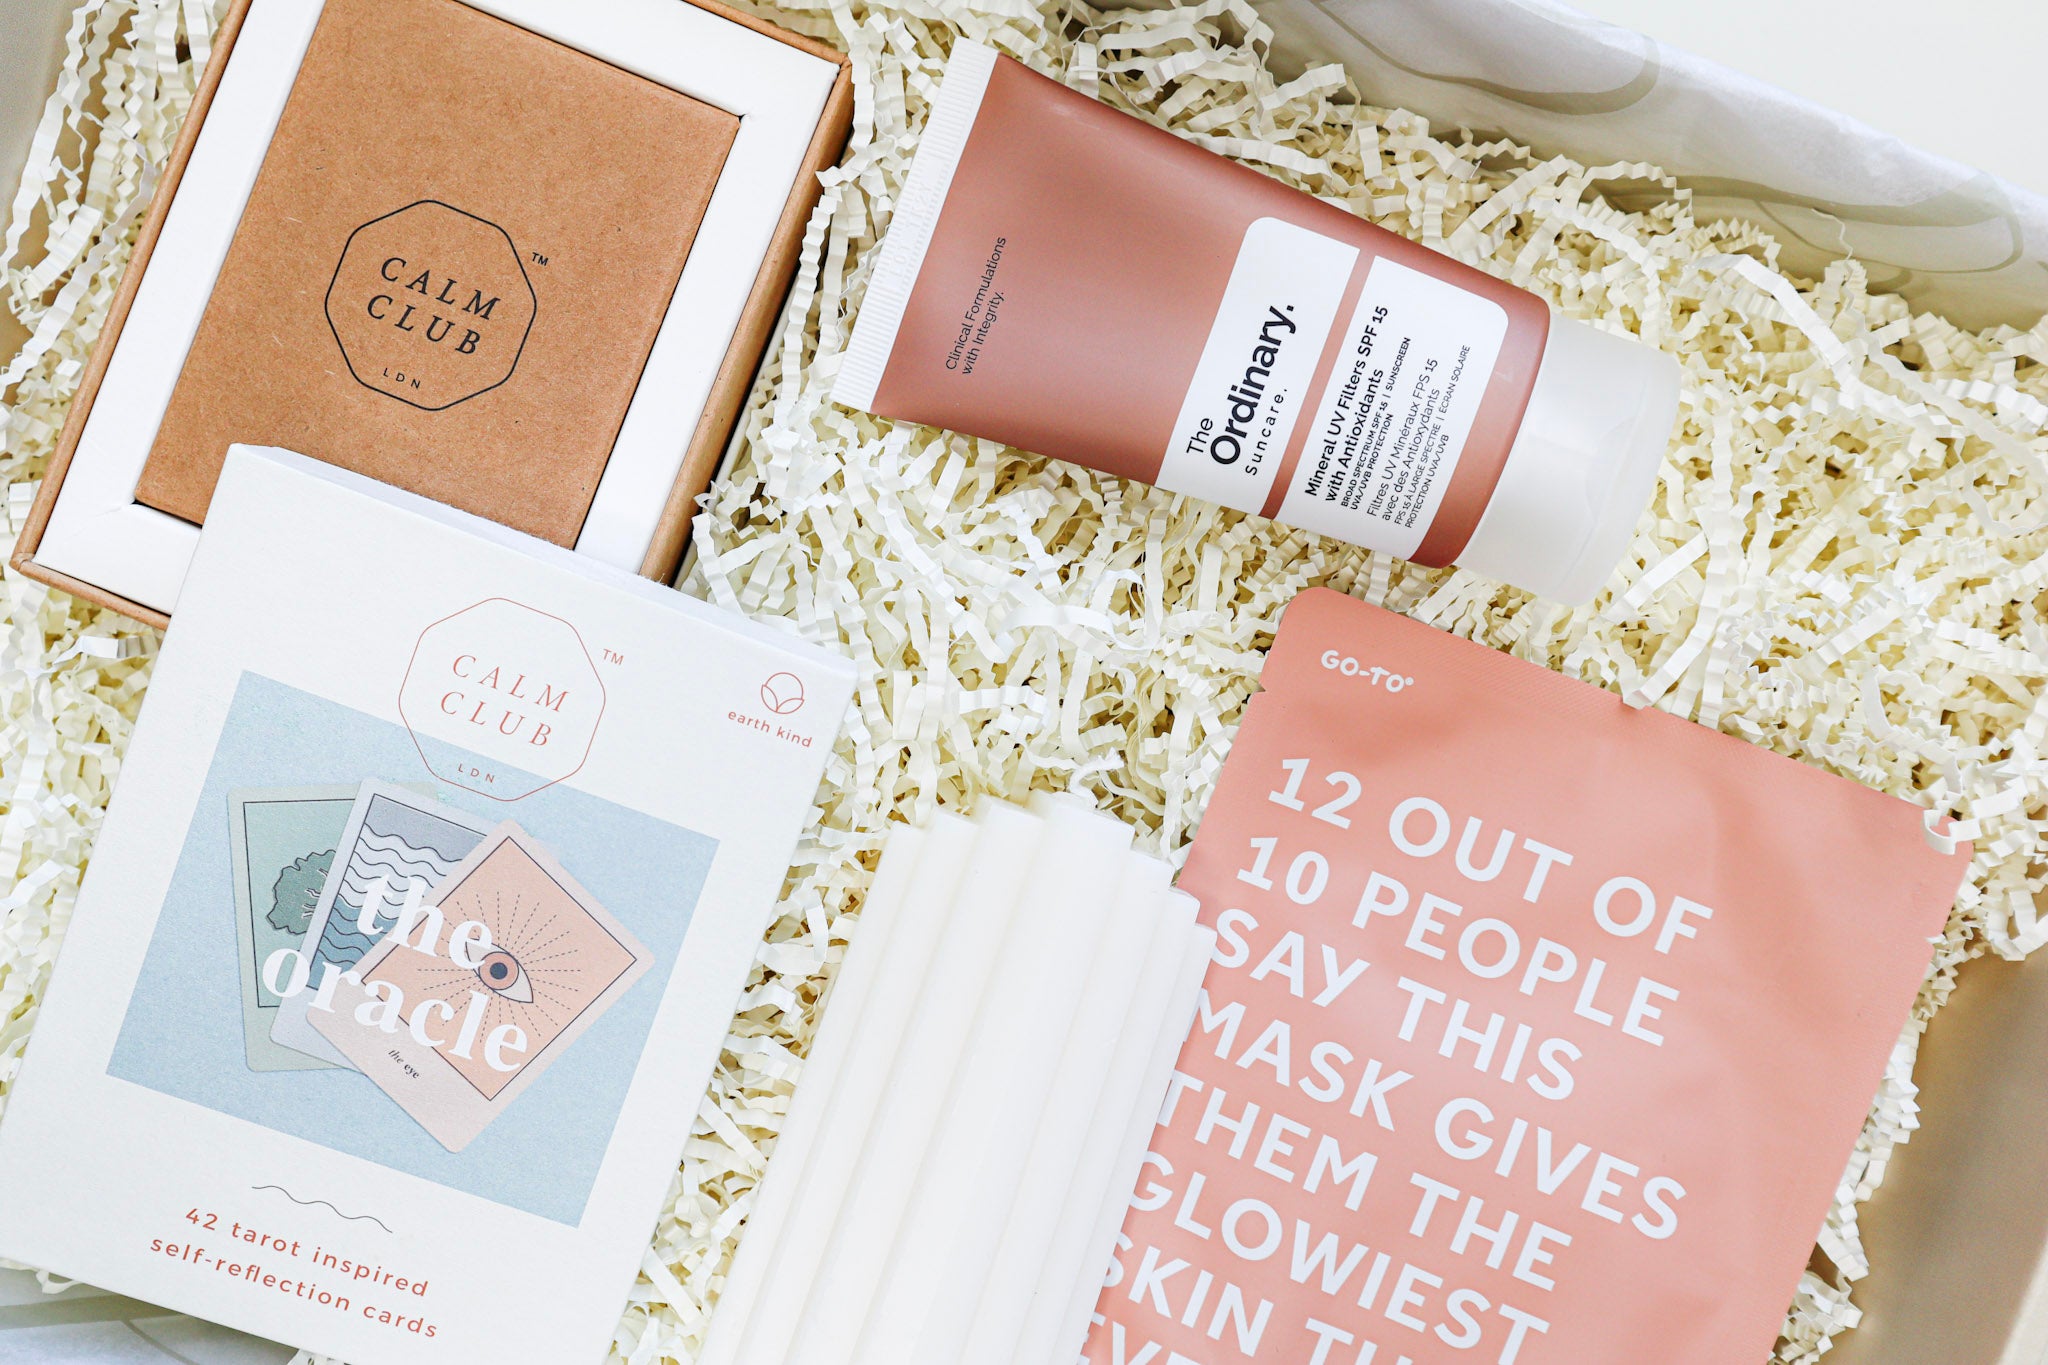 A beige gift box containing The Oracle self-reflection cards in a white and brown cardboard box, a white, ridged pillar candle, a tan coloured tube of The Ordinary Sunscreen and a rust coloured Go To Sheet Face Mask